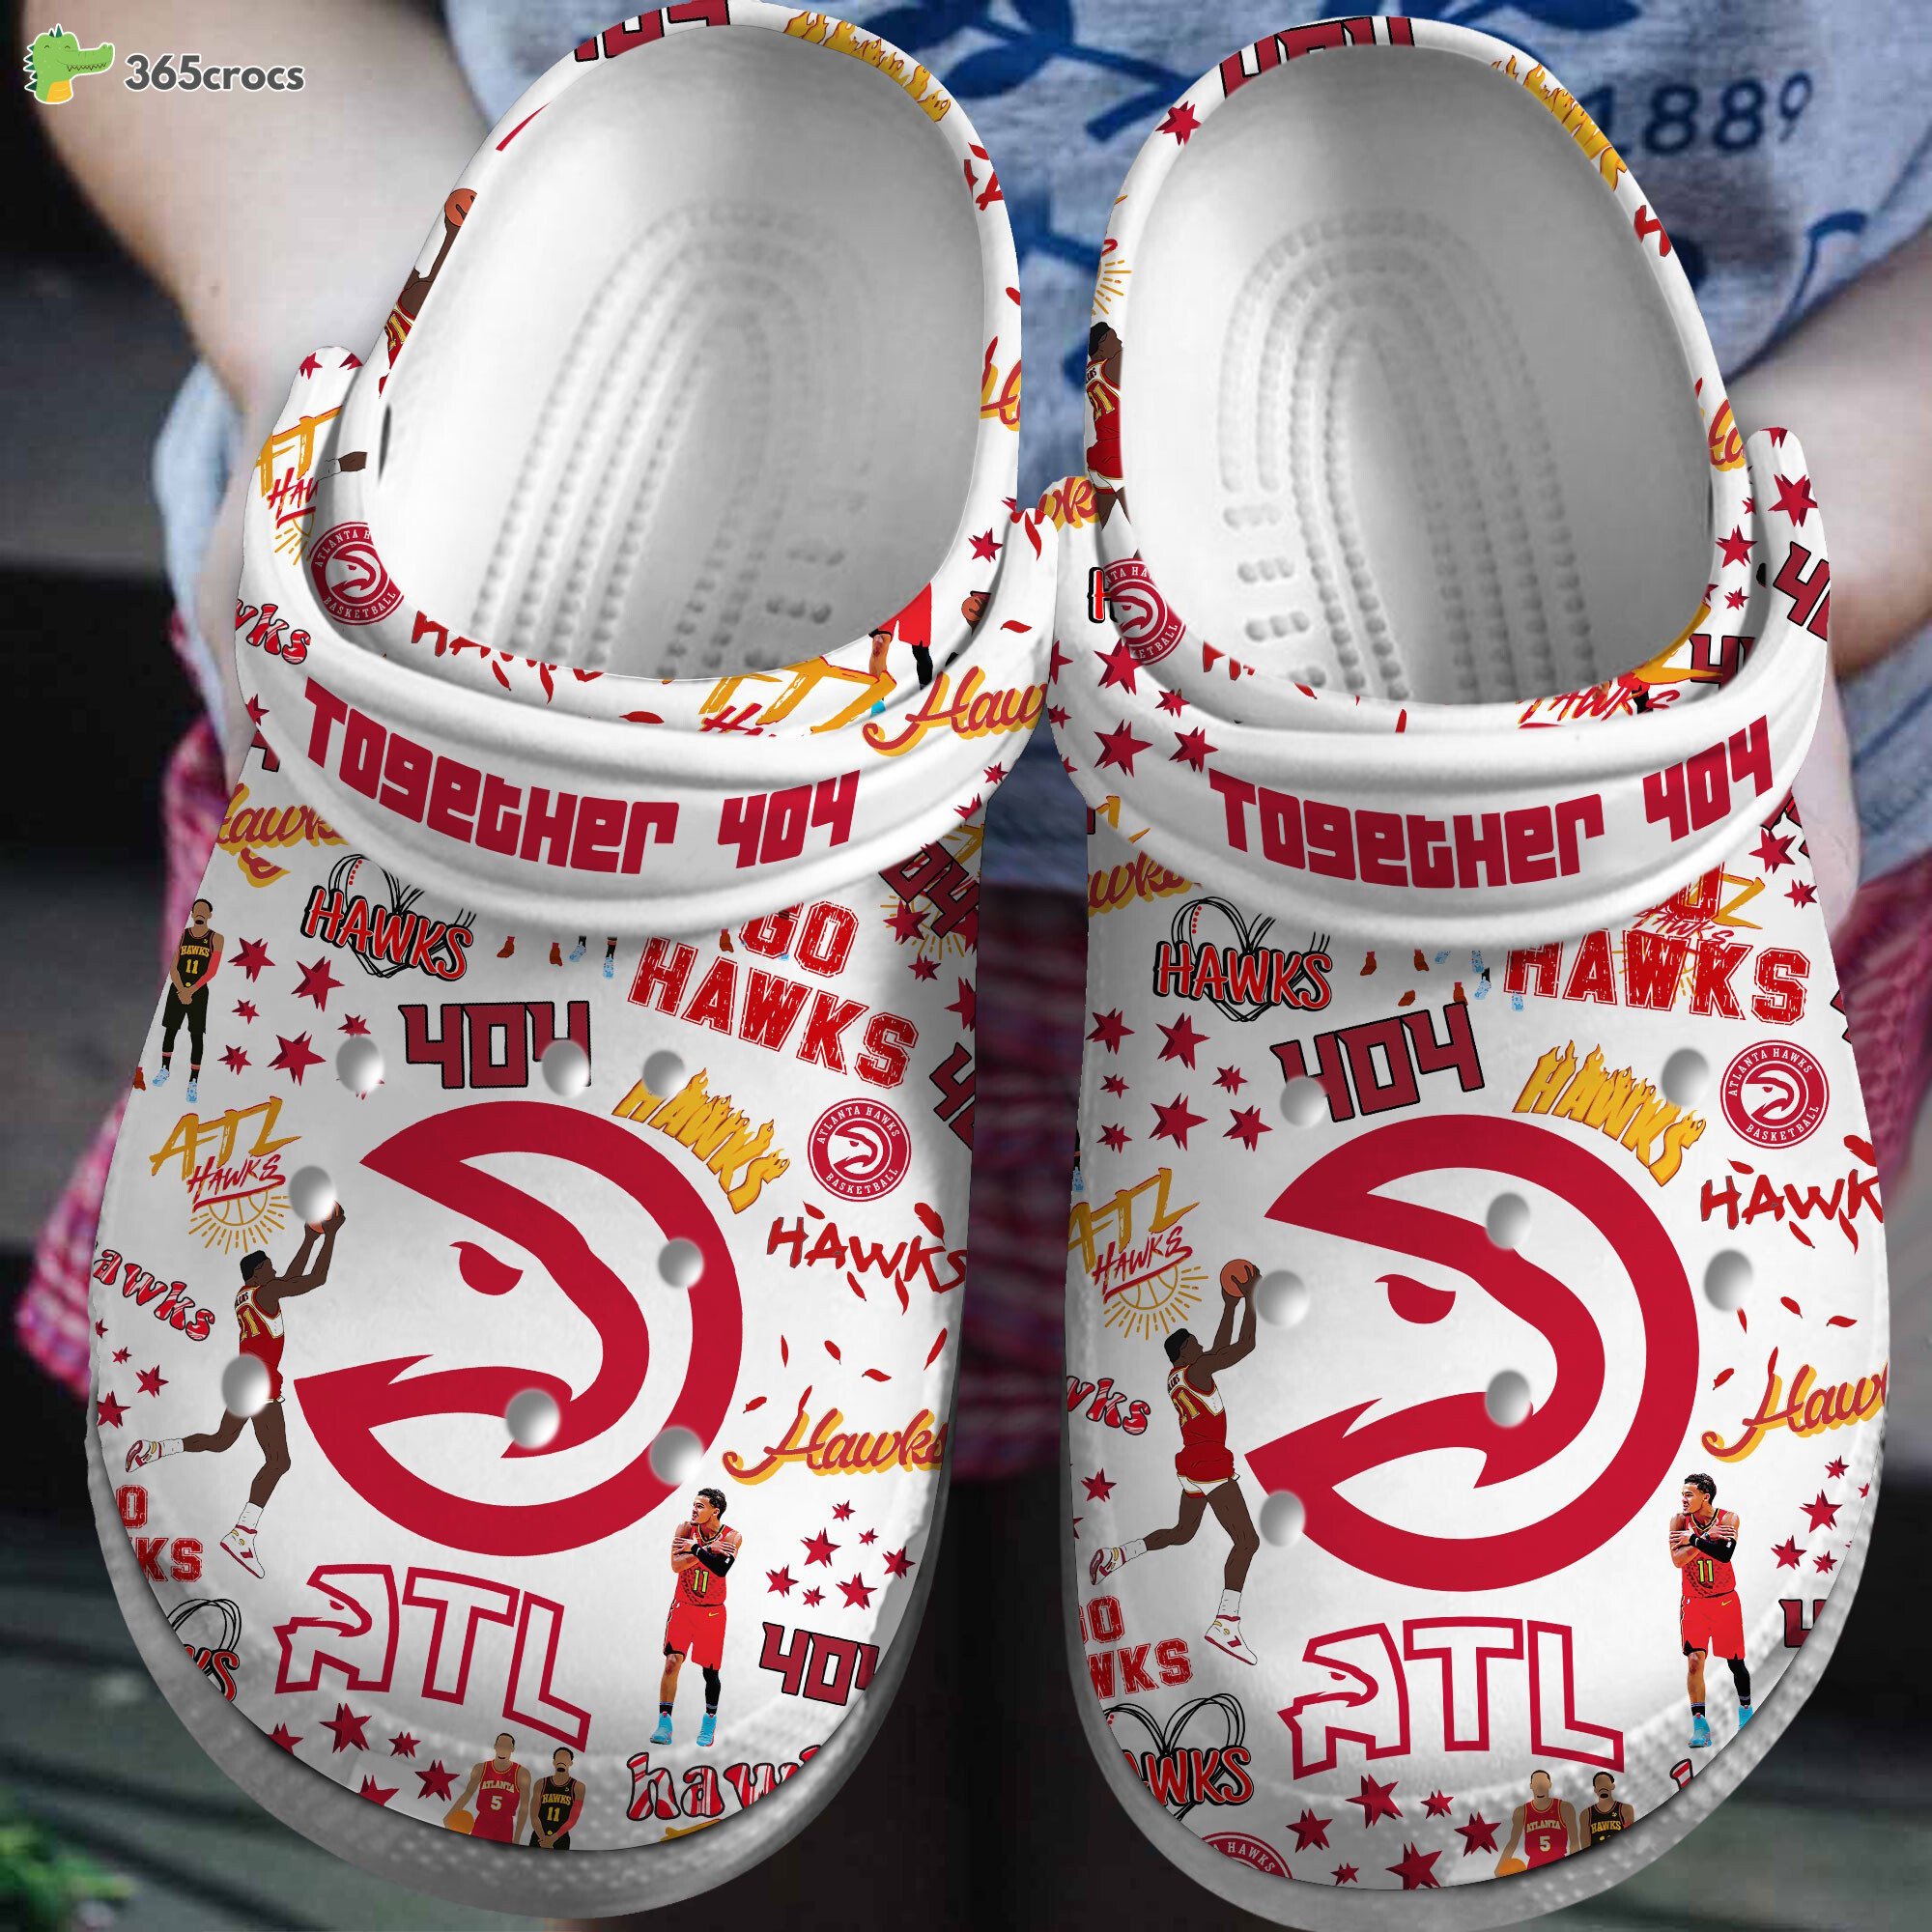 Atlanta Hawks NBA Action Comfortable Crocss Clogs Shoes Sports Collection Trend